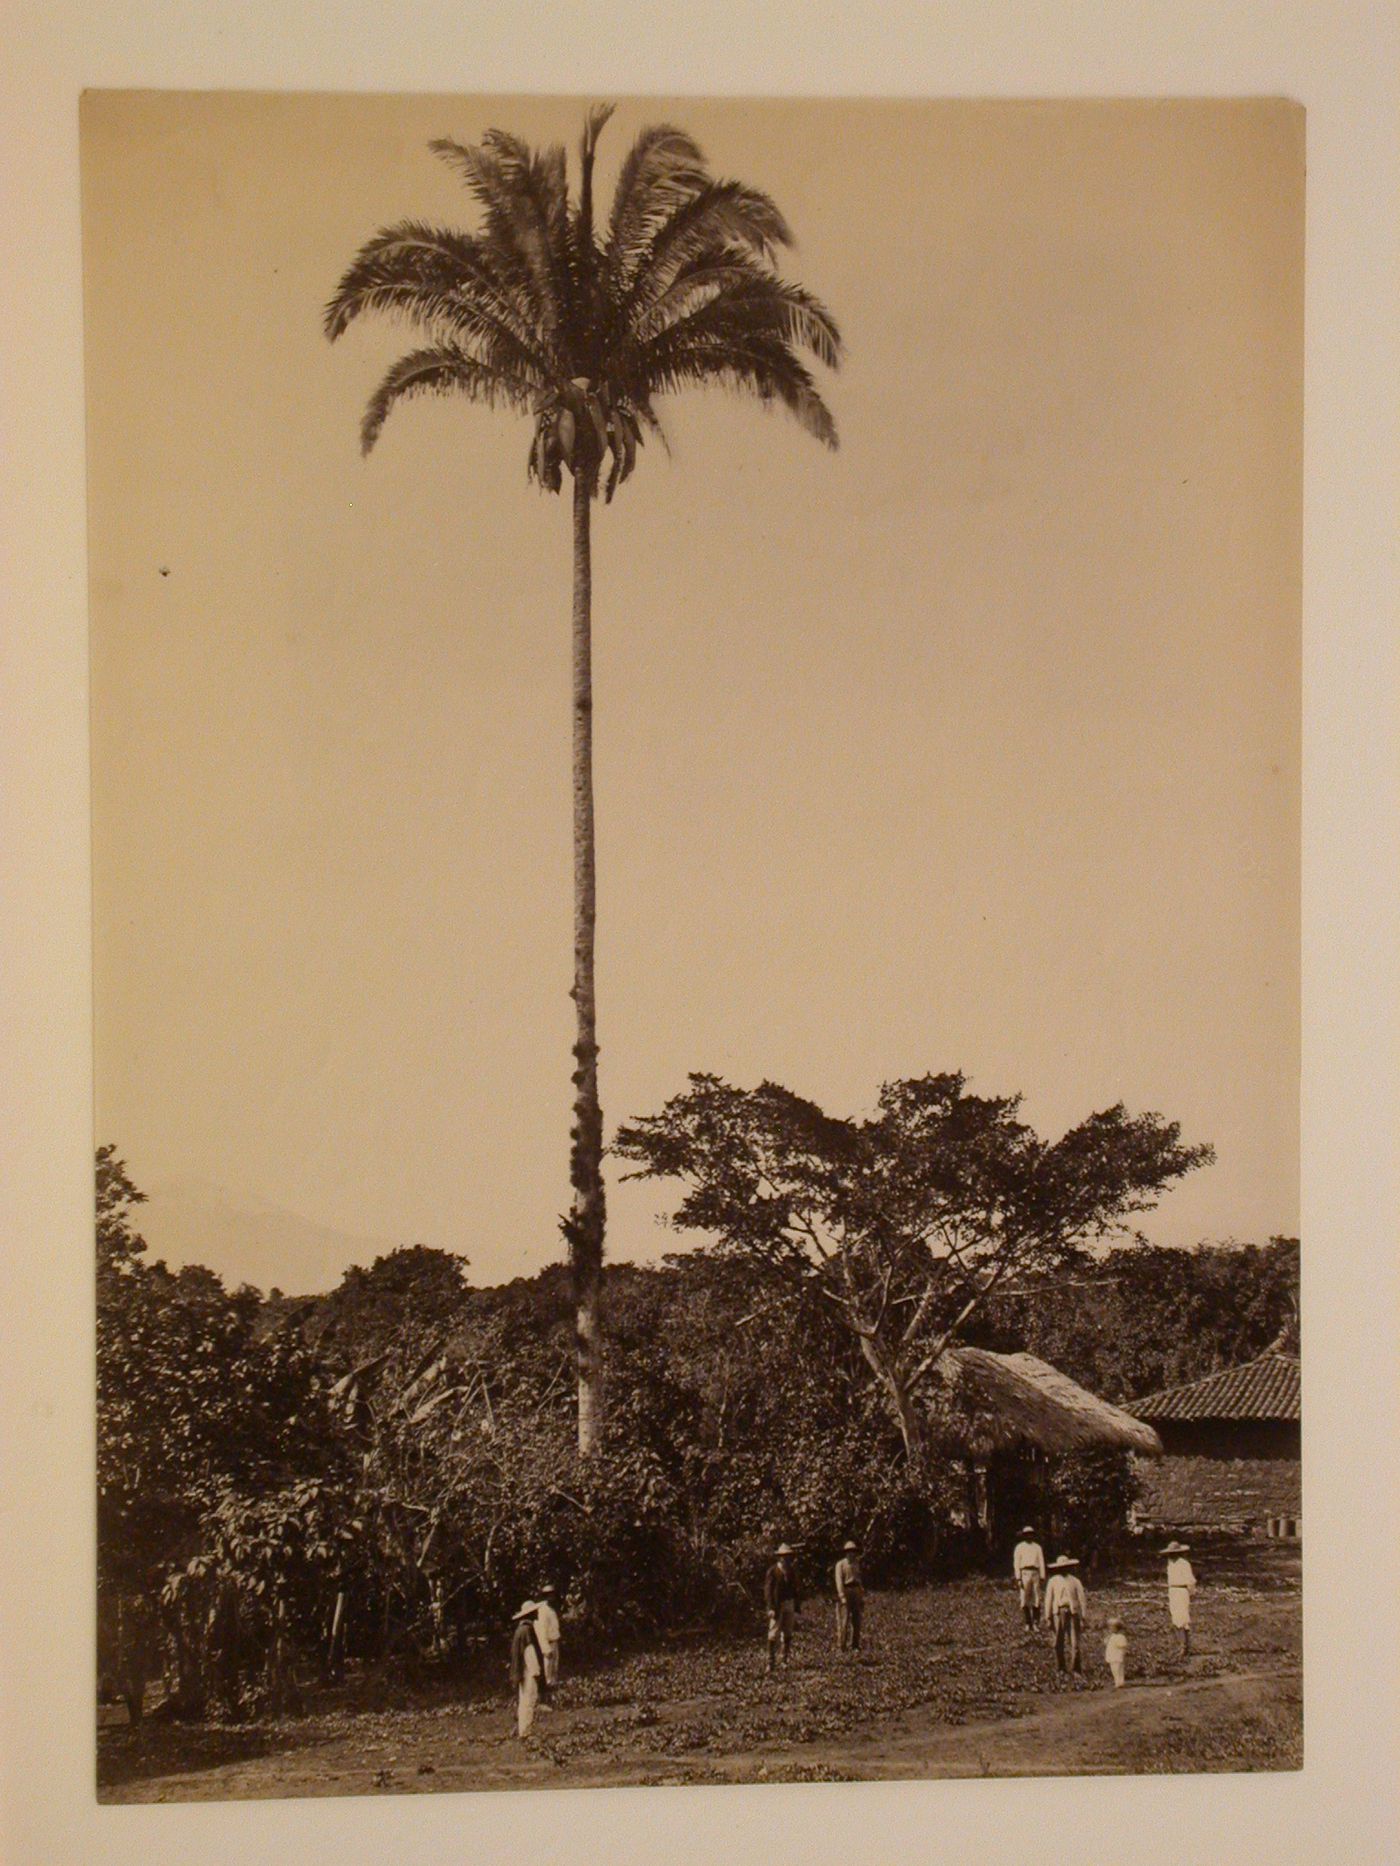 View of a palm tree and a group of people with huts and a forest in the background, Veracruz-Llave, Mexico